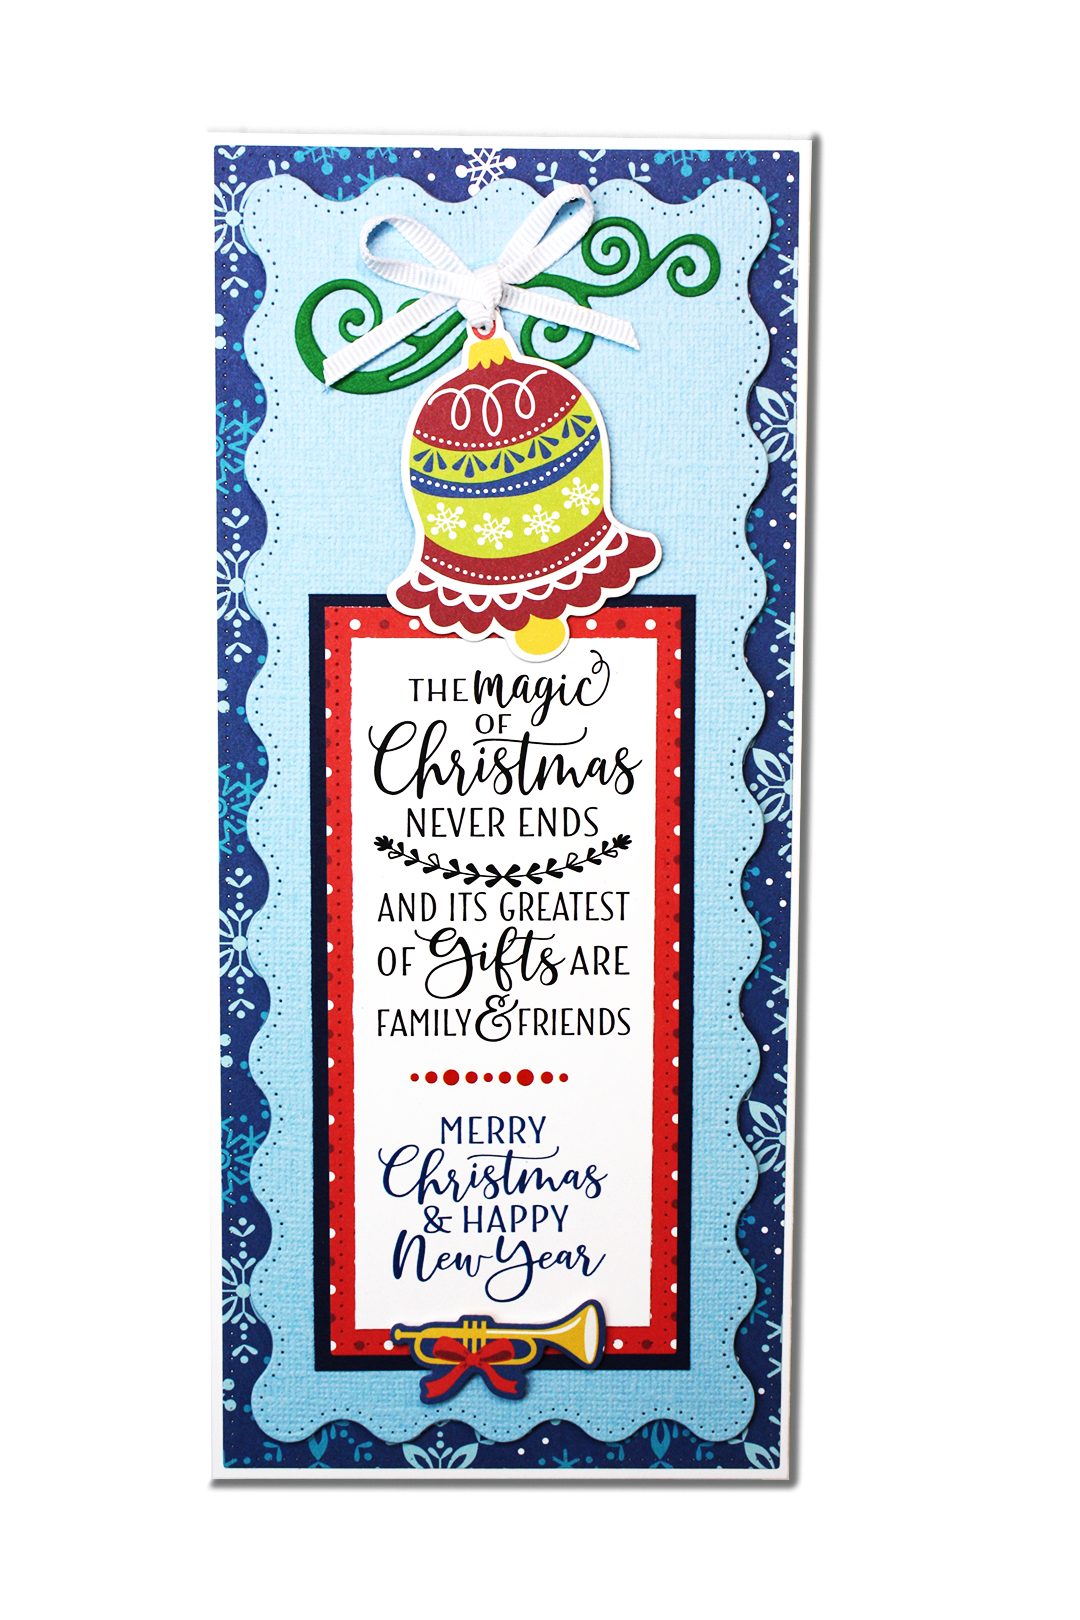 Handmade card using the stamp set, "Joy to the World" from Dare 2 B Artzy.